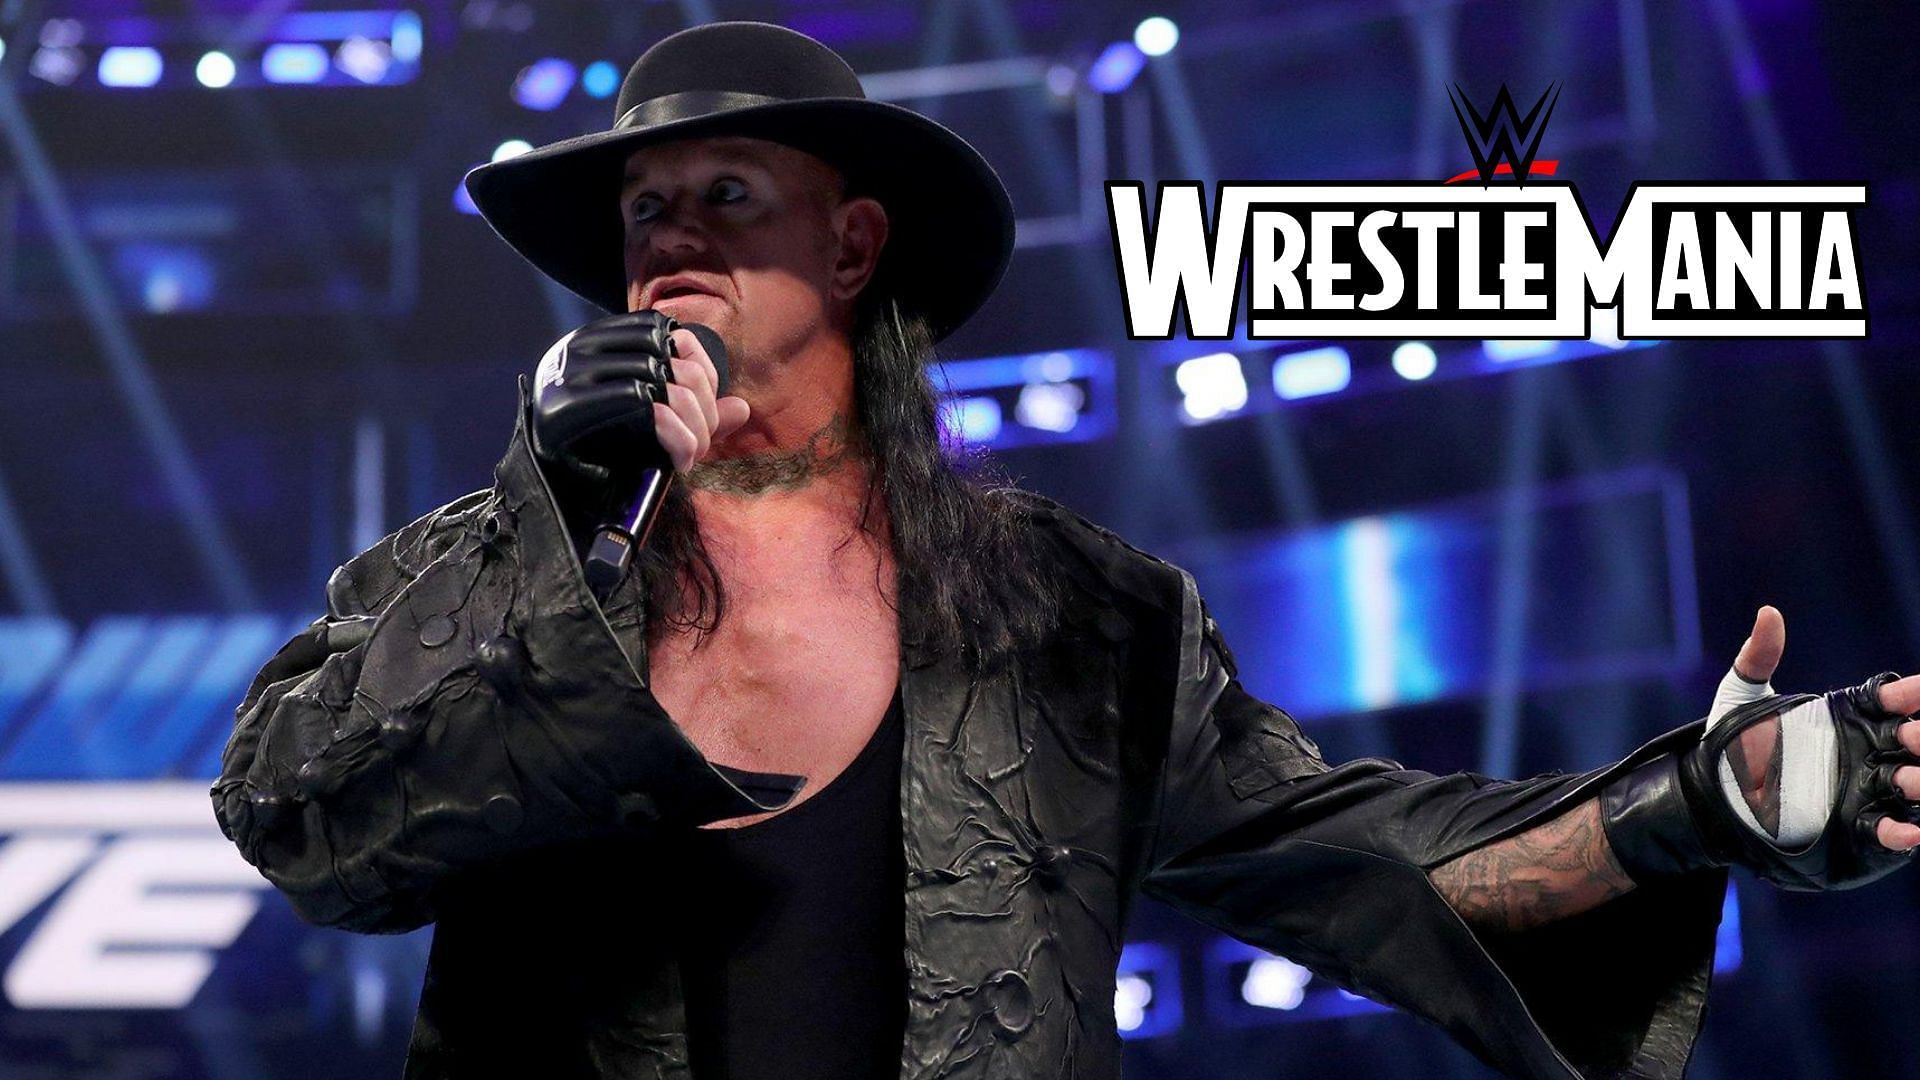 WWE legend The Undertaker quashes rumor of real-life beef with his former WrestleMania rival